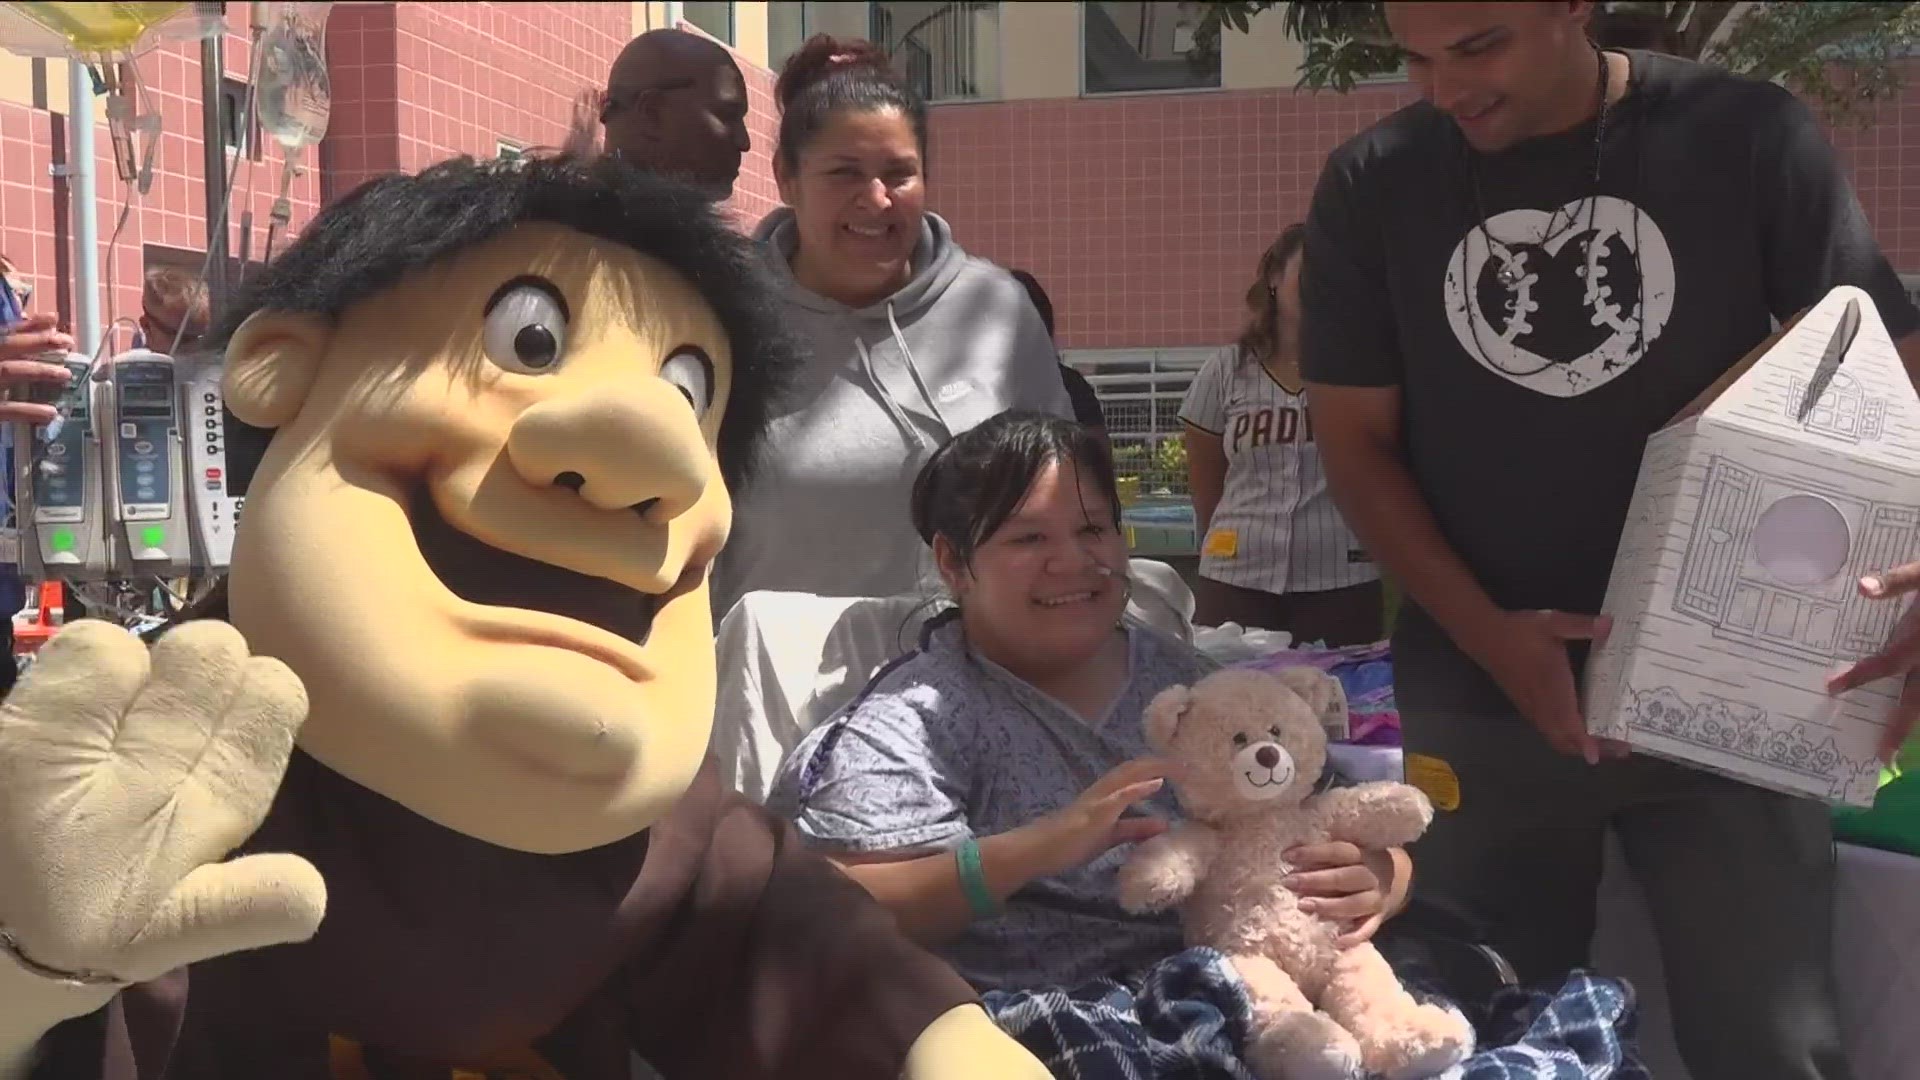 Umps CARE Charities delivered stuffed animals to kids at Rady Children's Hospital.